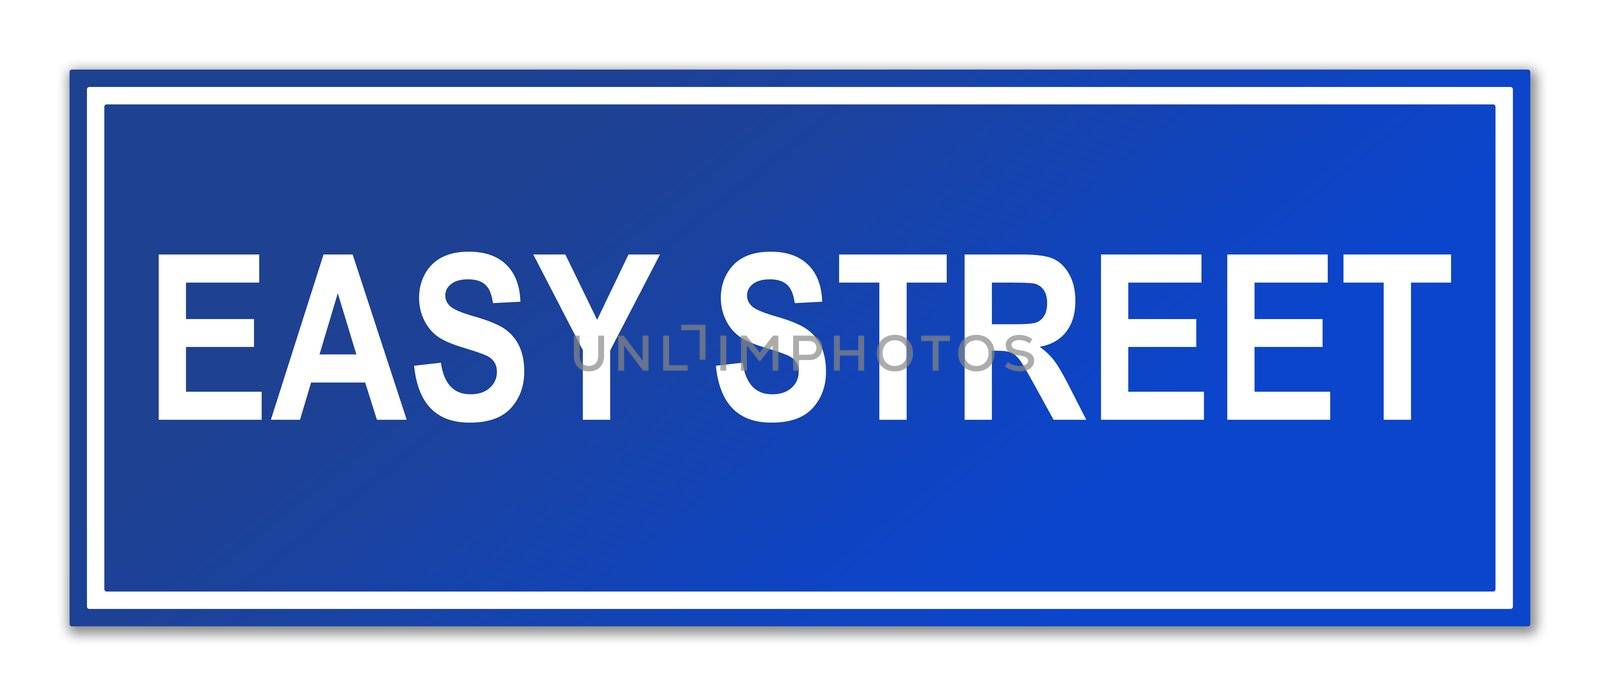 Easy street sign isolated on white background with copy space.